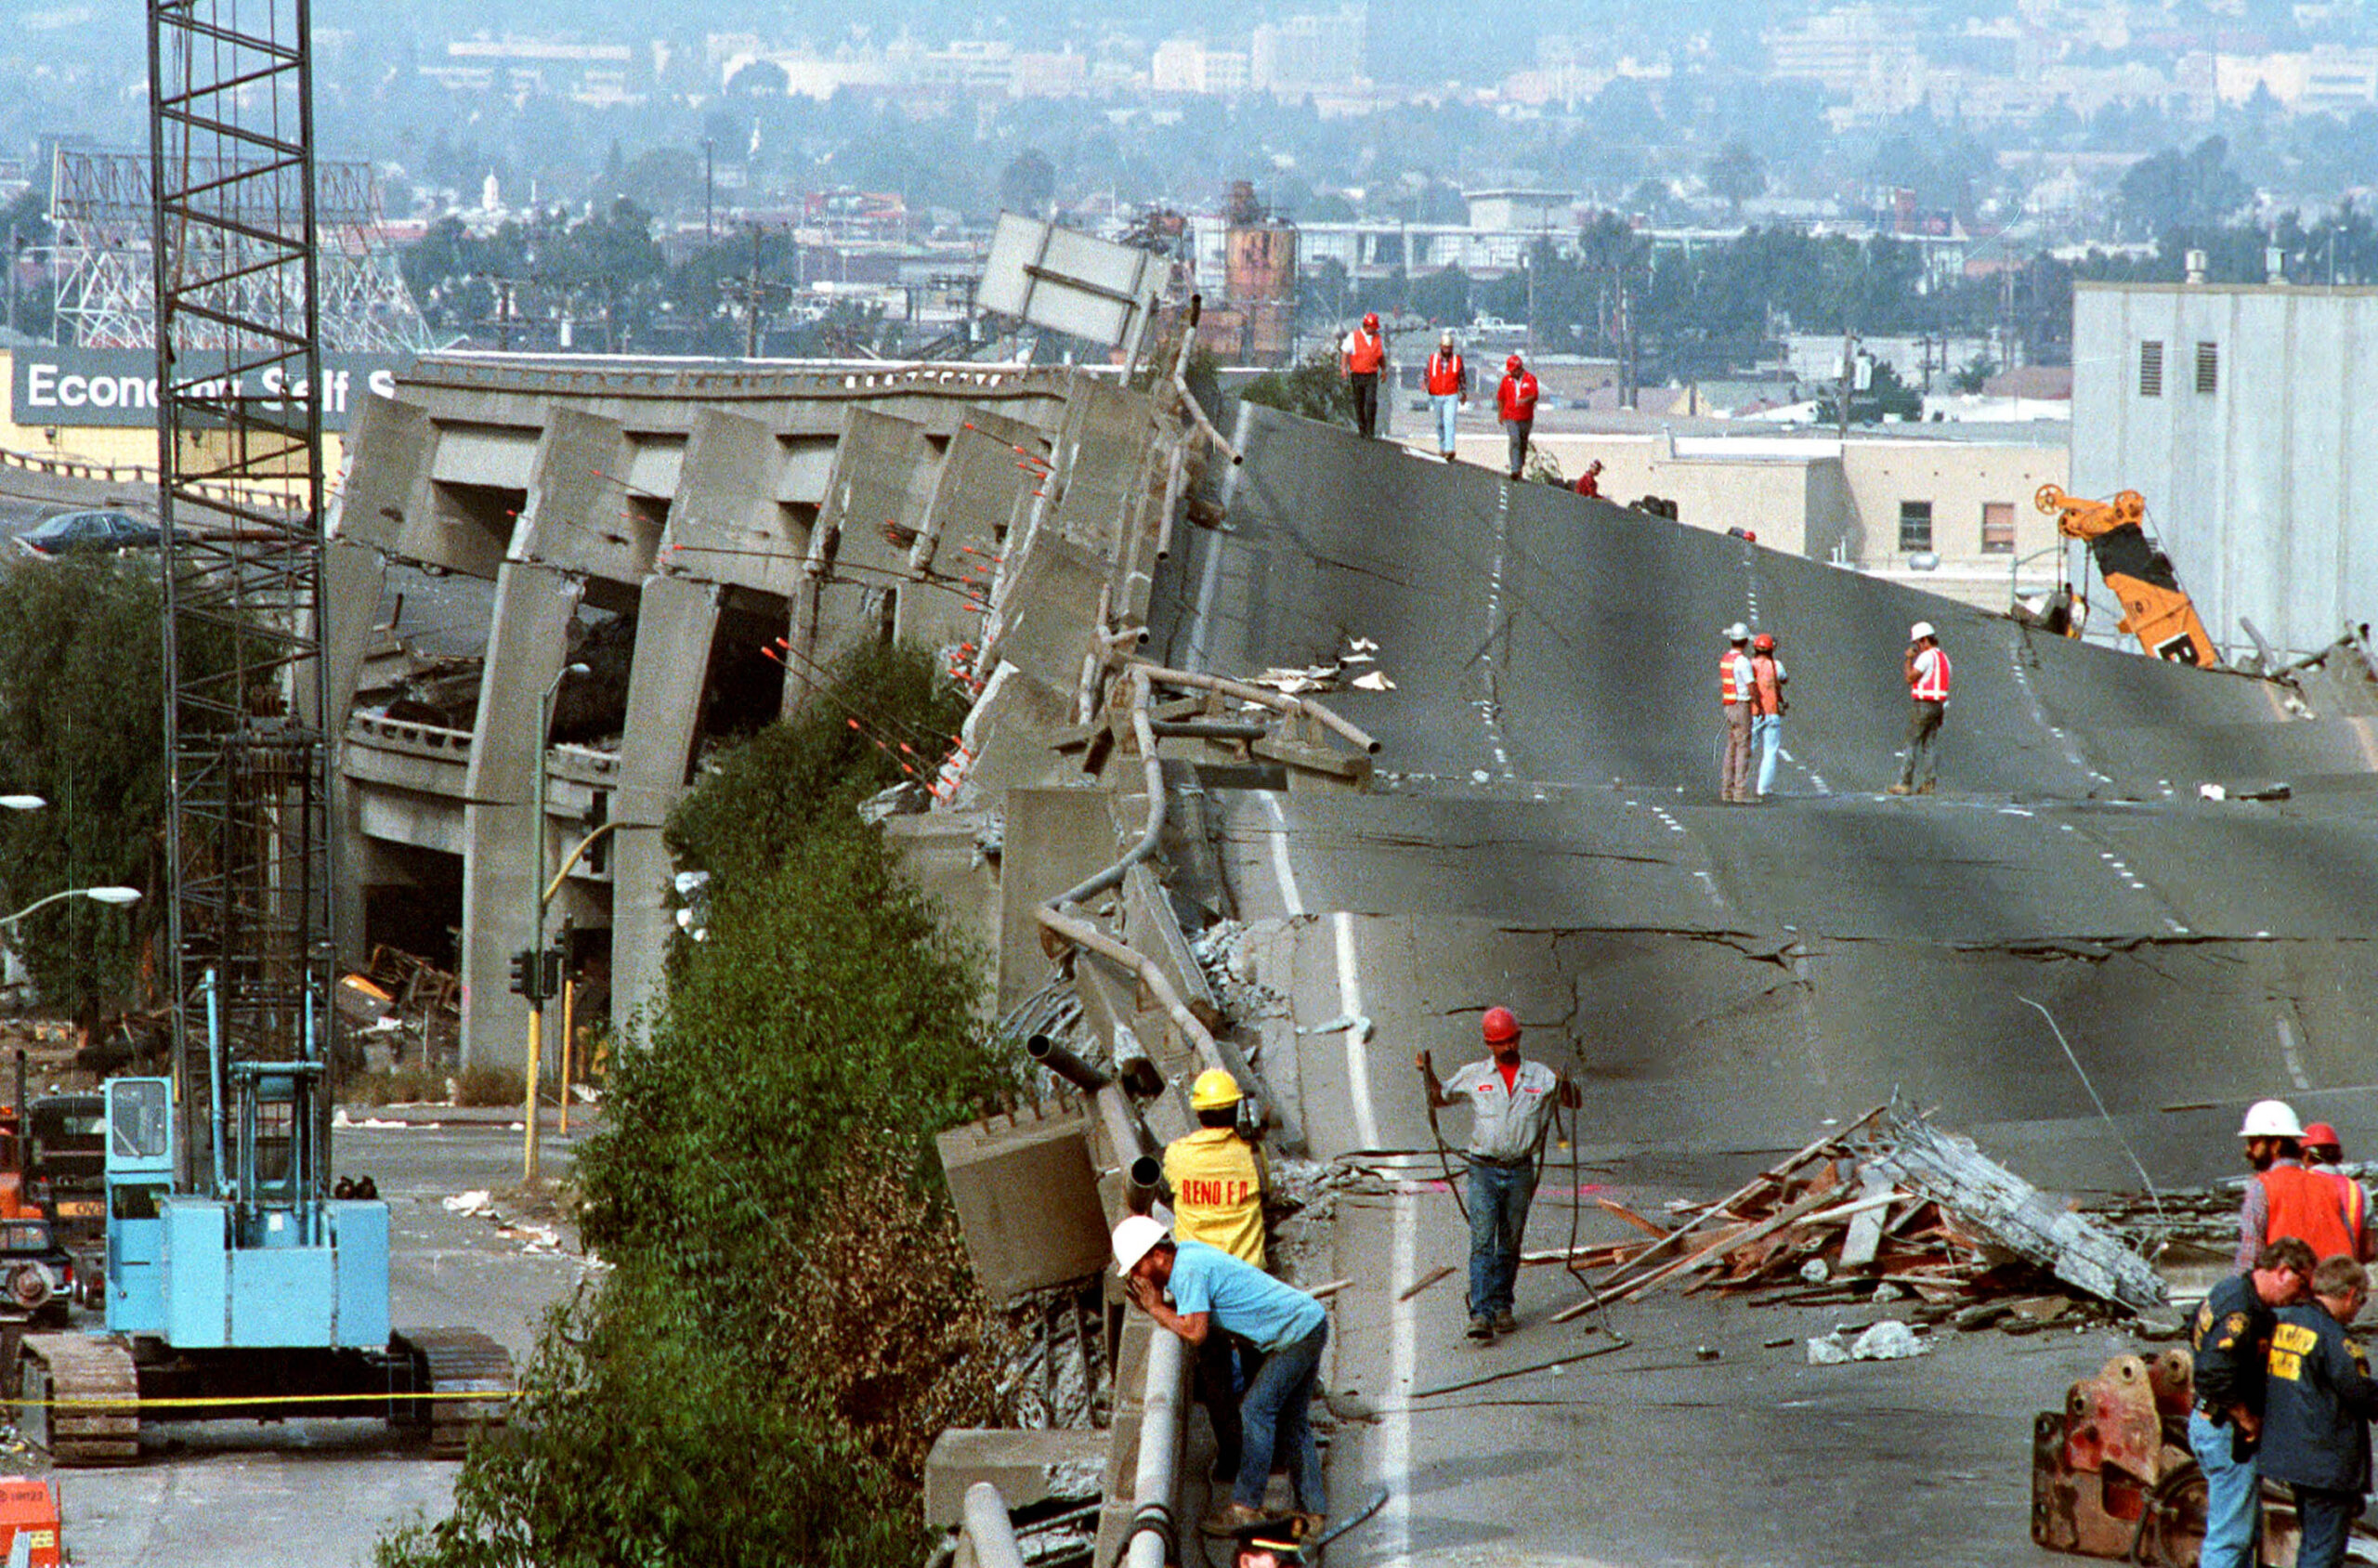 Surviving The Shaking: Understanding And Preparing For An Earthquake